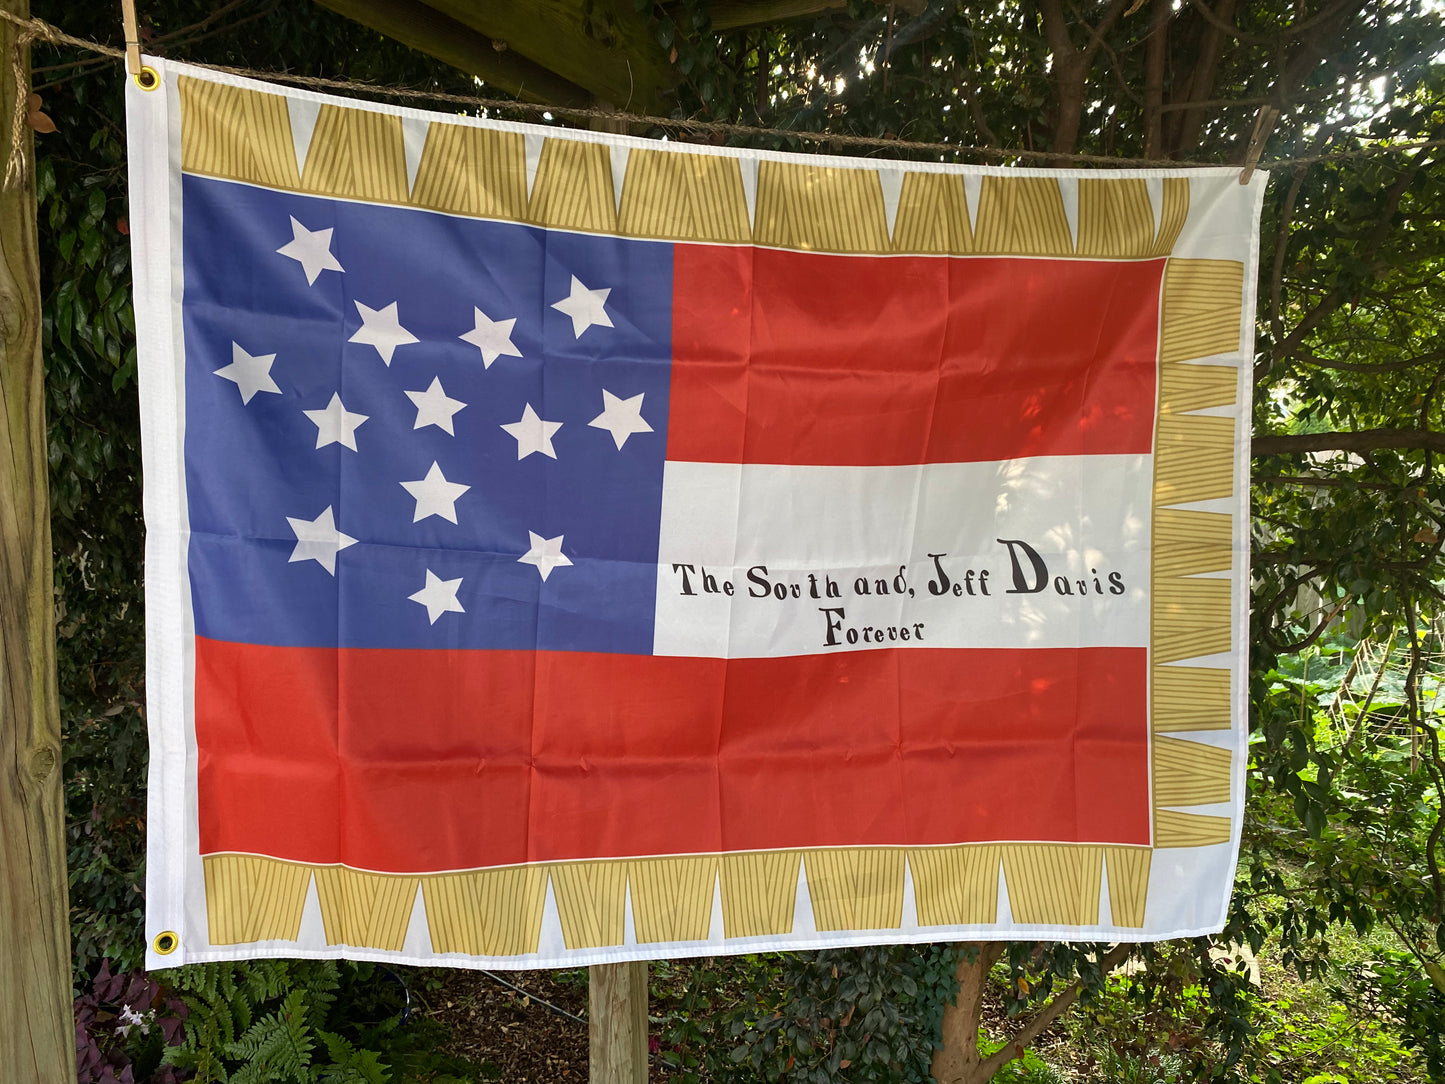 "The South and, Jeff Davis Forever" 1st Louisiana Cavalry 1st National House Flag